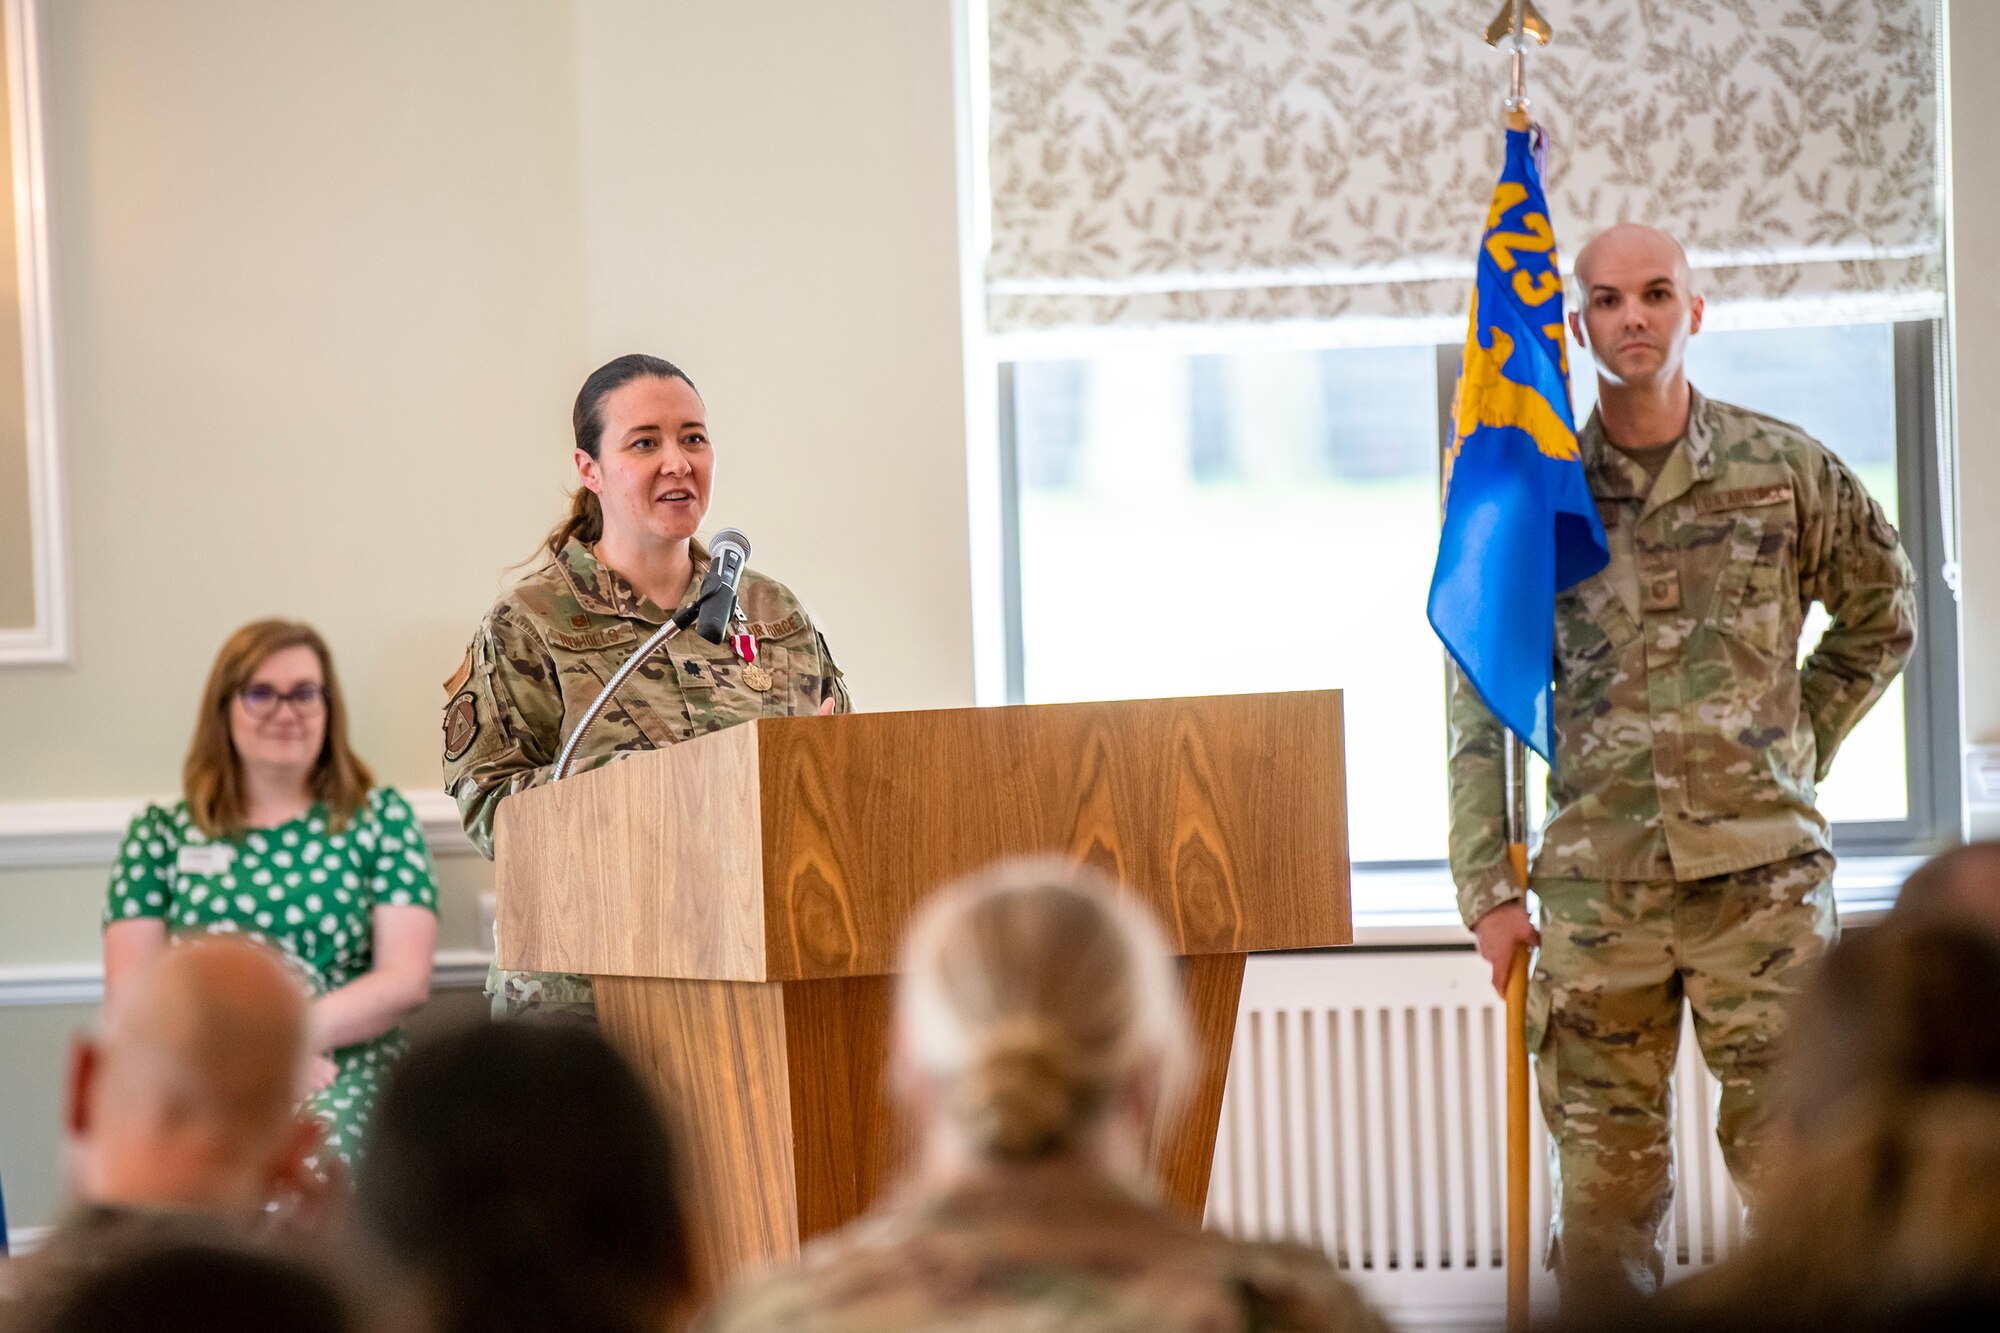 U.S. Air Force Lt. Col. Kirsten Nicholls, 423d Force Support Squadron outgoing commander, speaks during a change of command ceremony at RAF Alconbury, England, June 5, 2023. During the ceremony, Nicholls relinquished command of the 423d FSS to Maj. Roy Surita. (U.S. Air Force photo by Staff Sgt. Eugene Oliver)